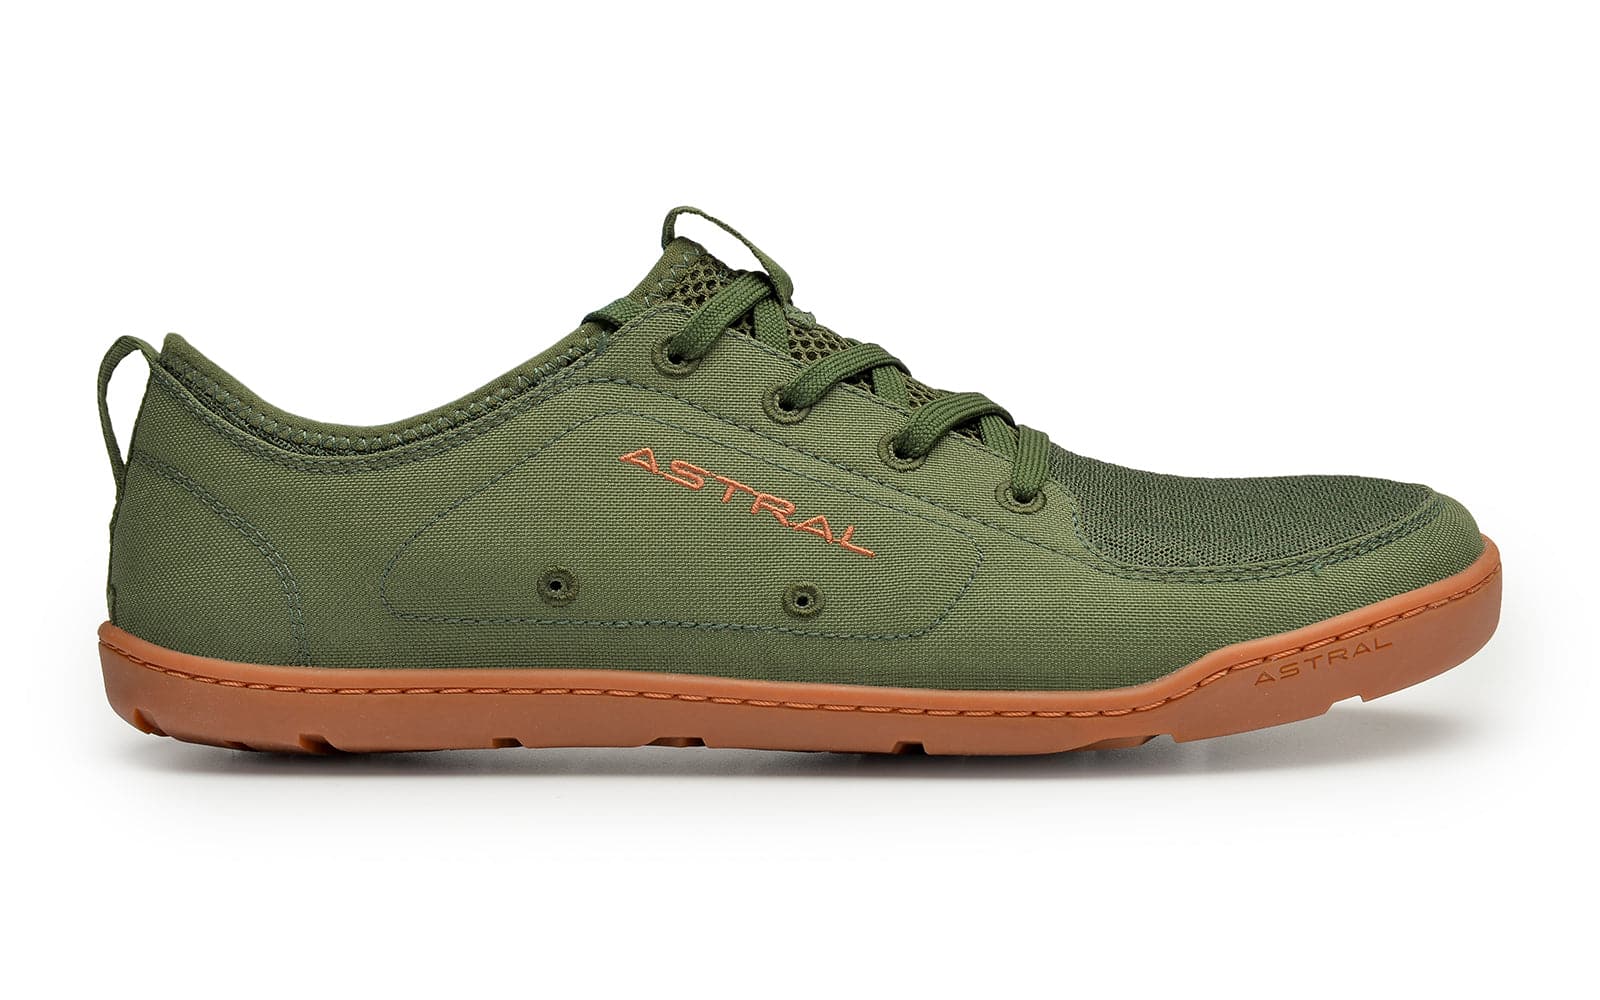 Featuring the Loyak - Men's men's footwear manufactured by Astral shown here from a fourth angle.